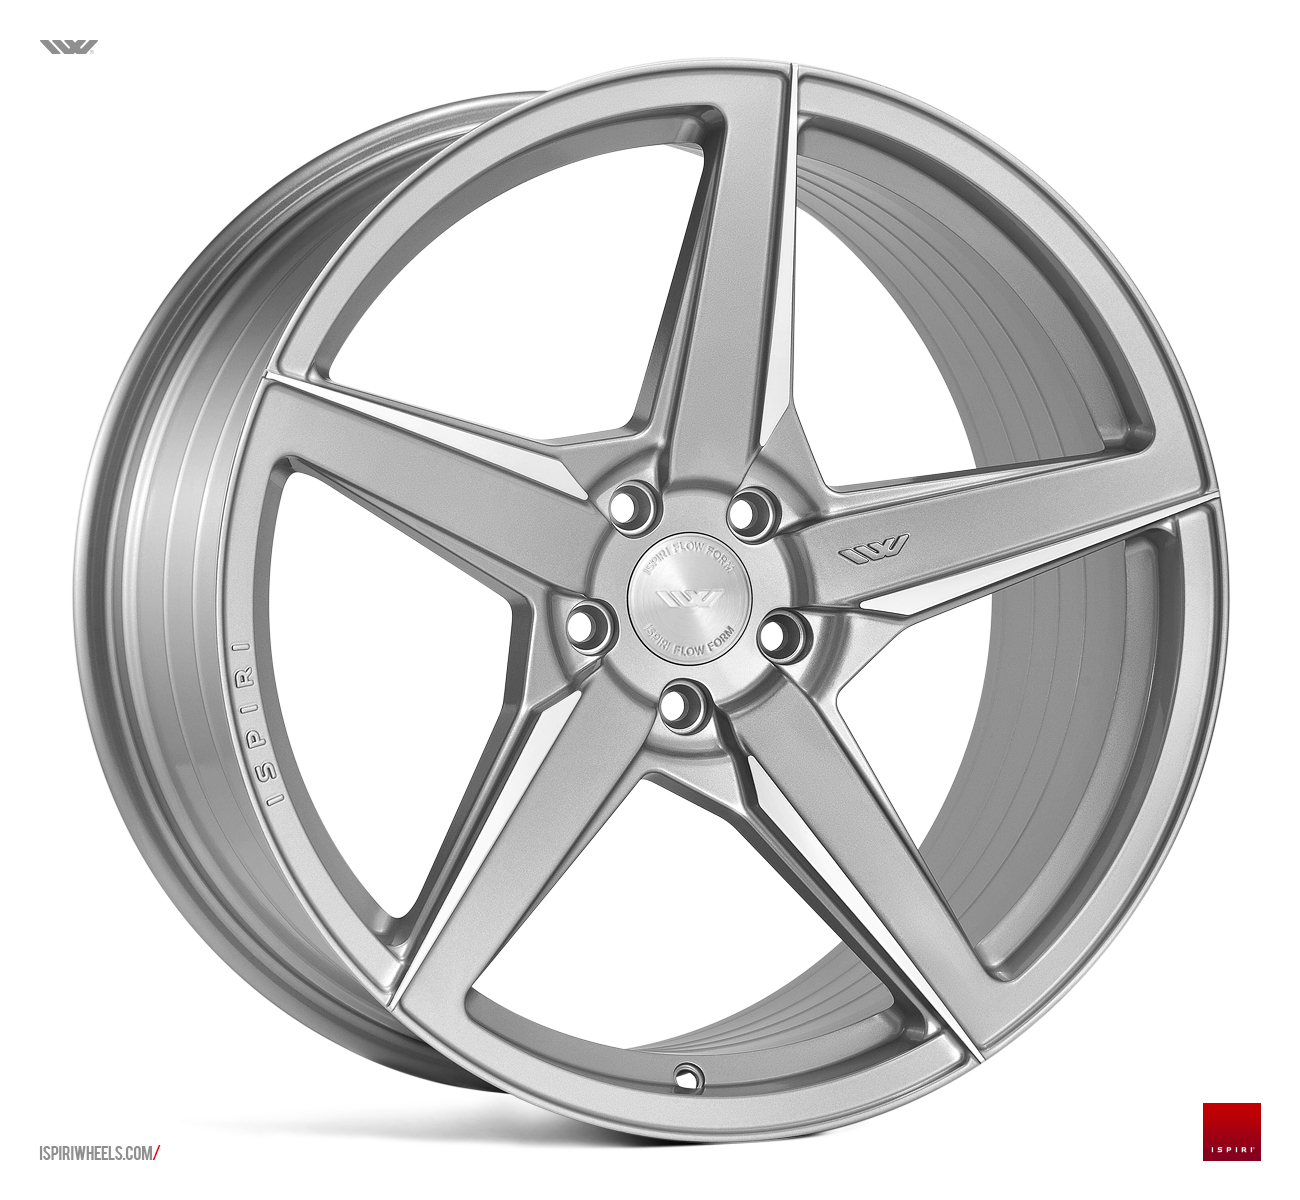 NEW 21" ISPIRI FFR5 5 SPOKE ALLOY WHEELS IN PURE SILVER BRUSHED, WITH WIDER 10.5" REAR